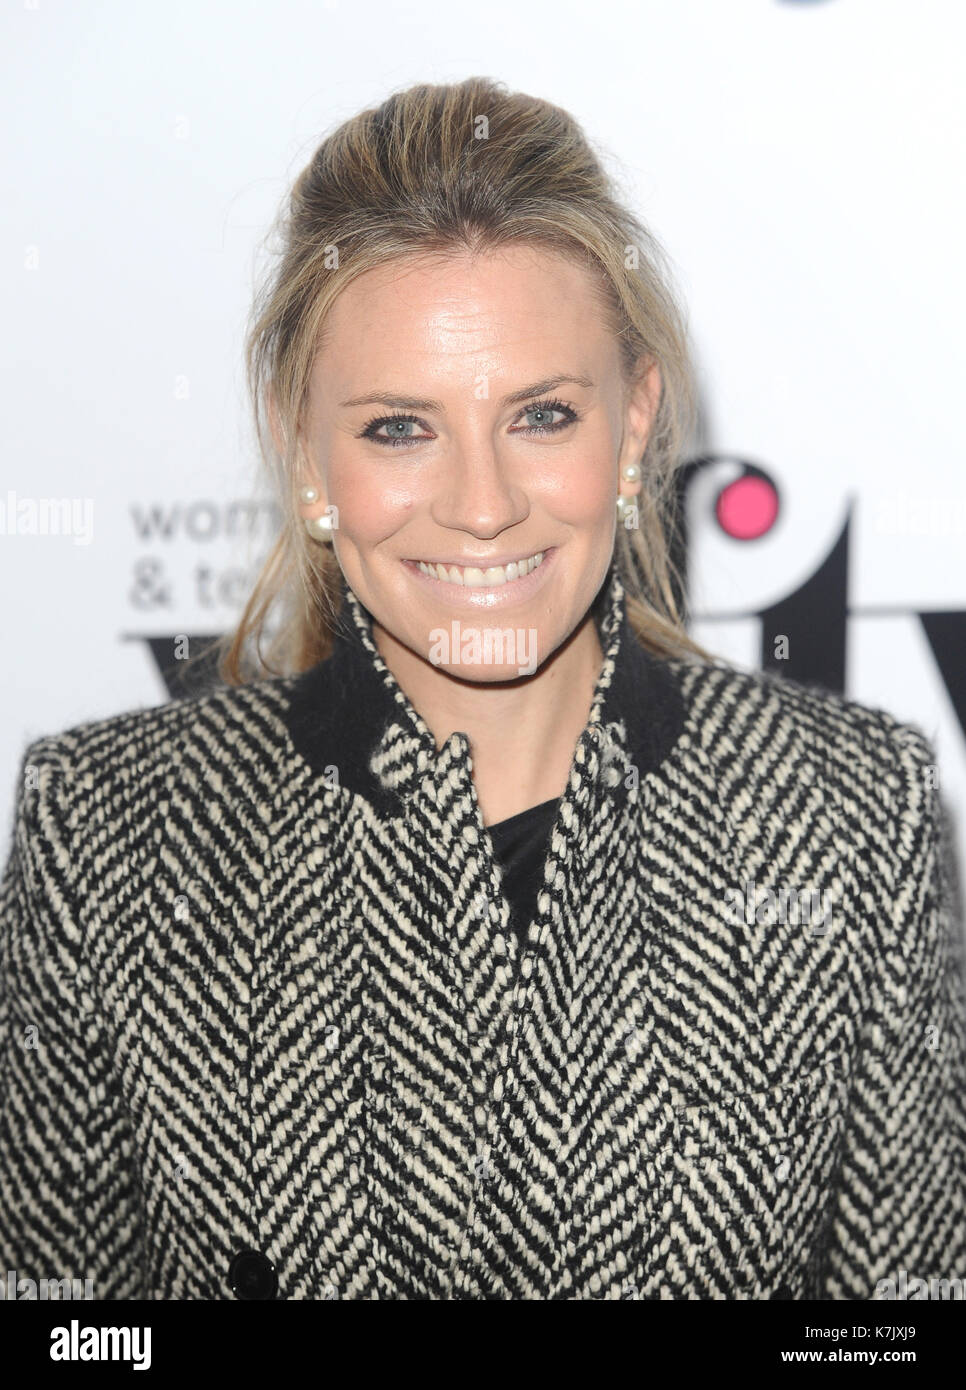 Photo Must Be Credited ©Kate Green/Alpha Press 079965 4/12/2015 Georgie Thompson Women In Film and TV Awards 2015 Park Lane Hilton London Stock Photo